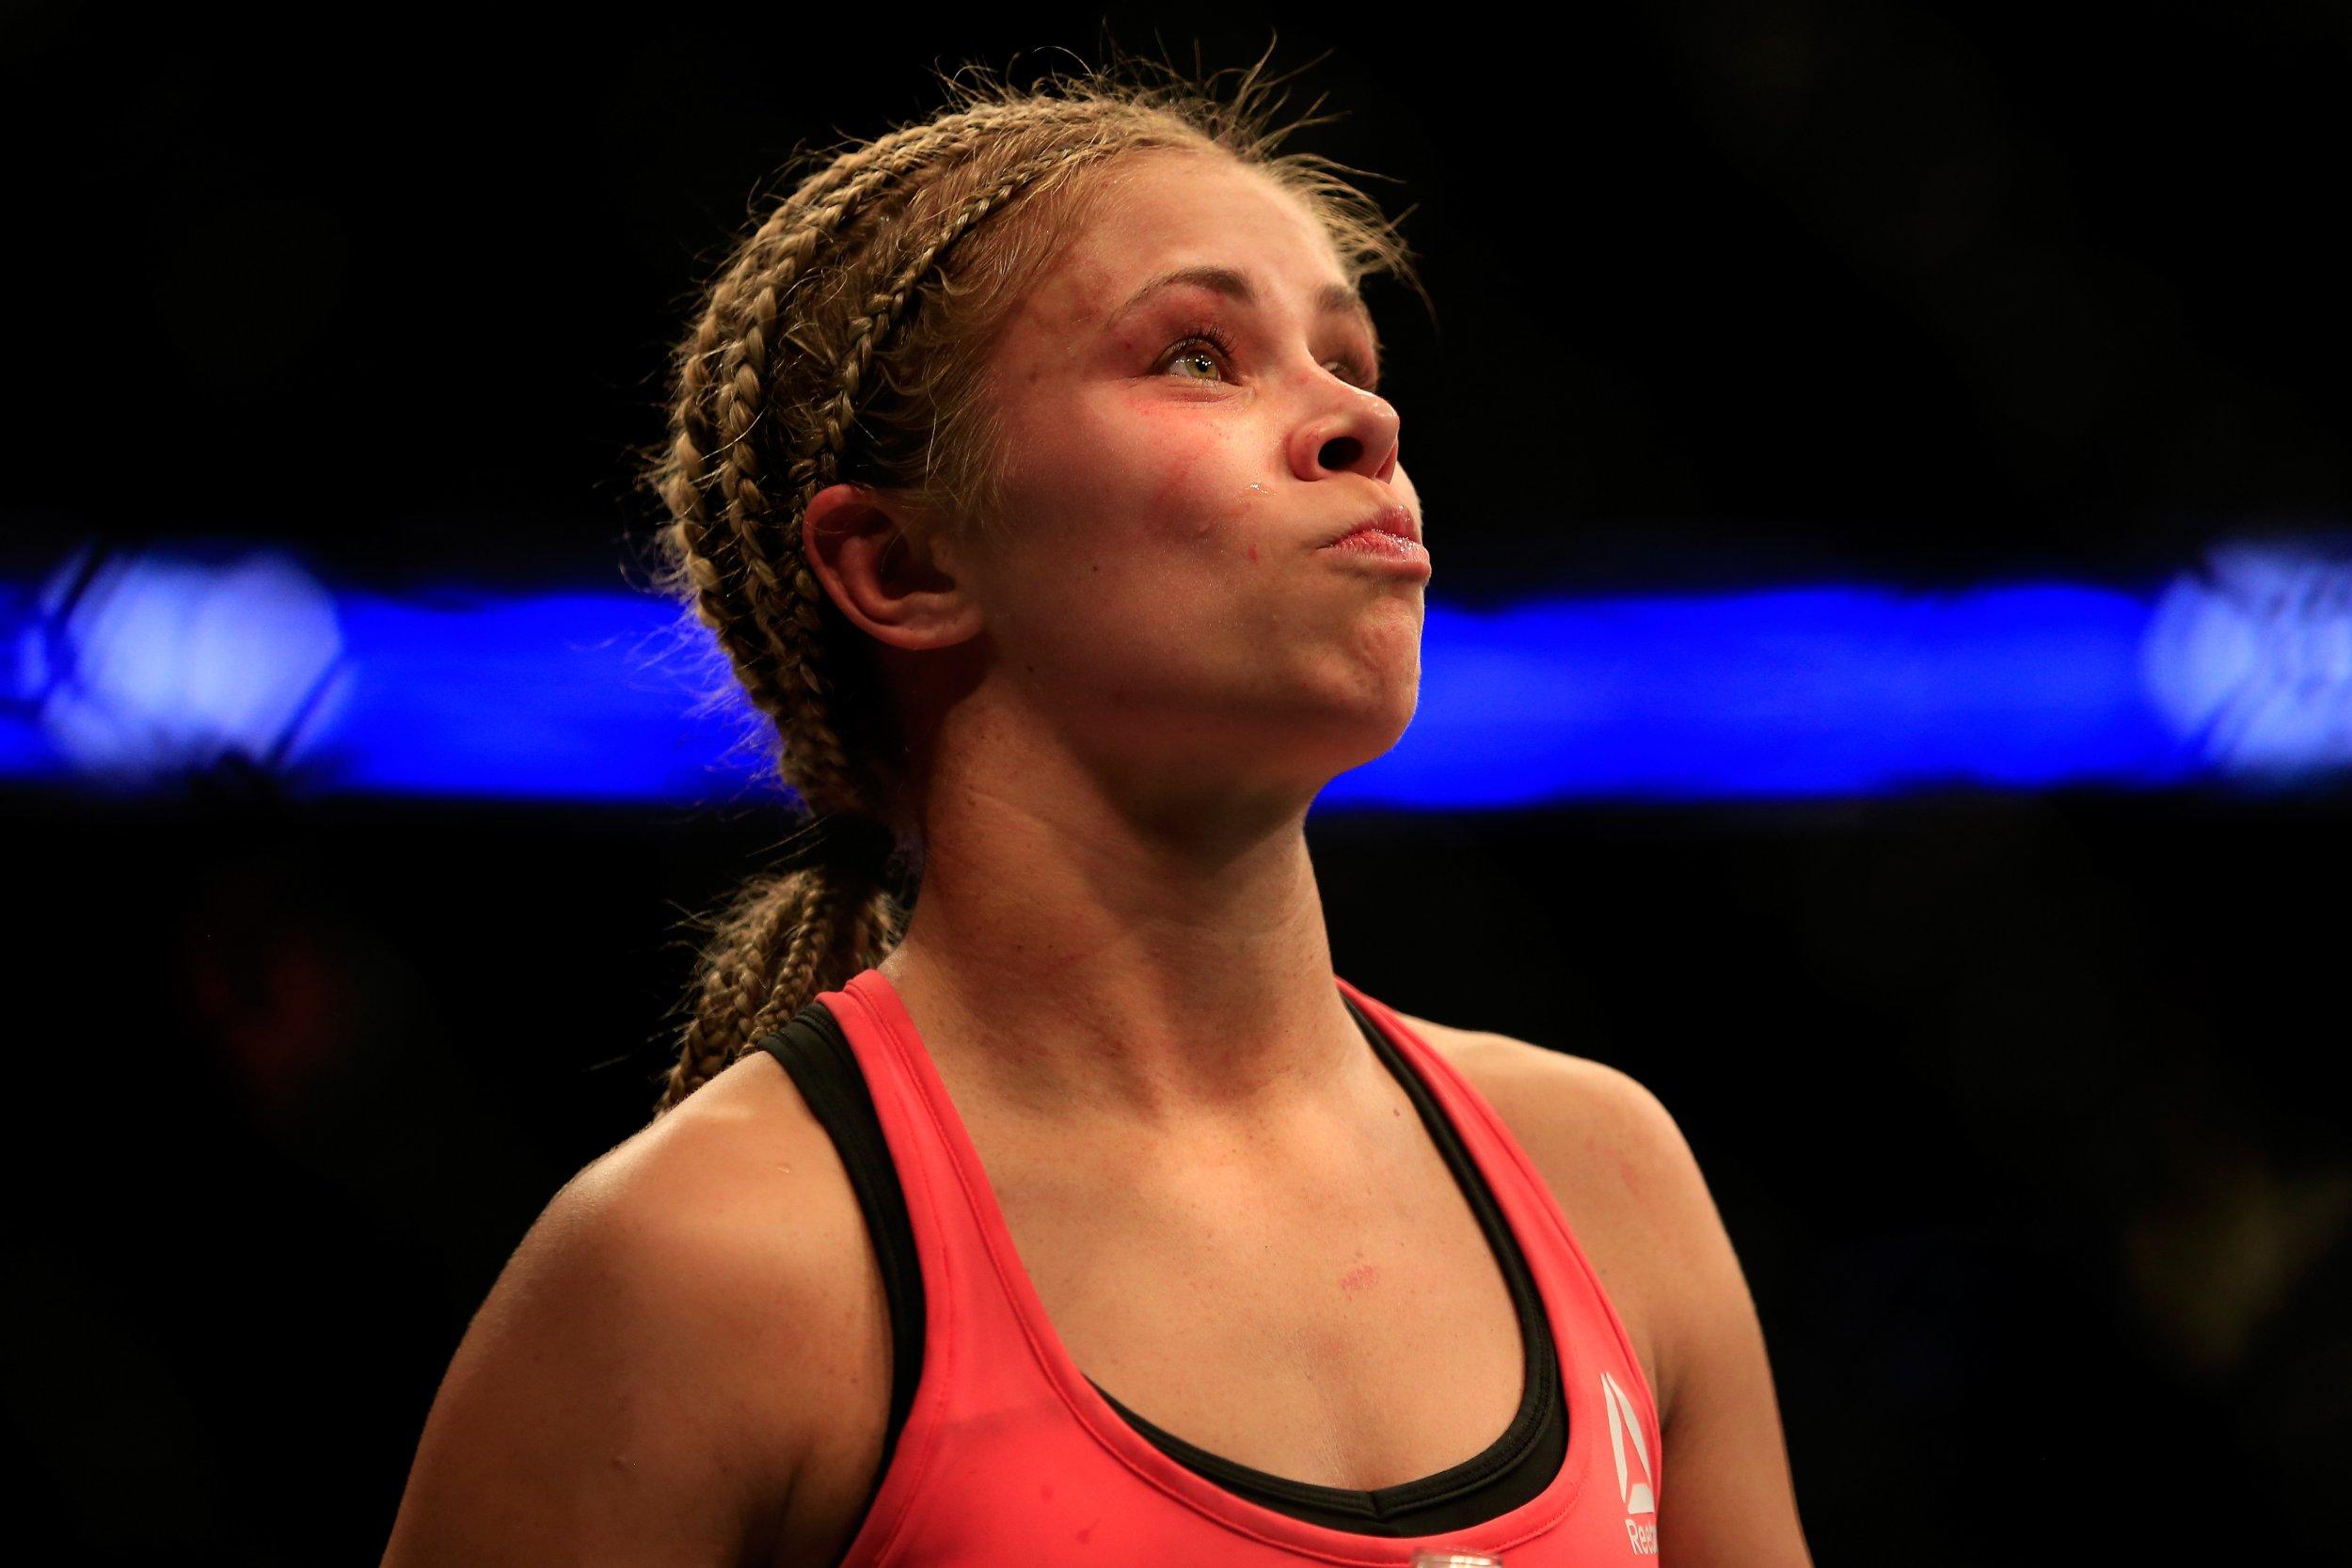 Cutting Weight Made Paige VanZant Pray She Wouldn't Die, UFC Fighter